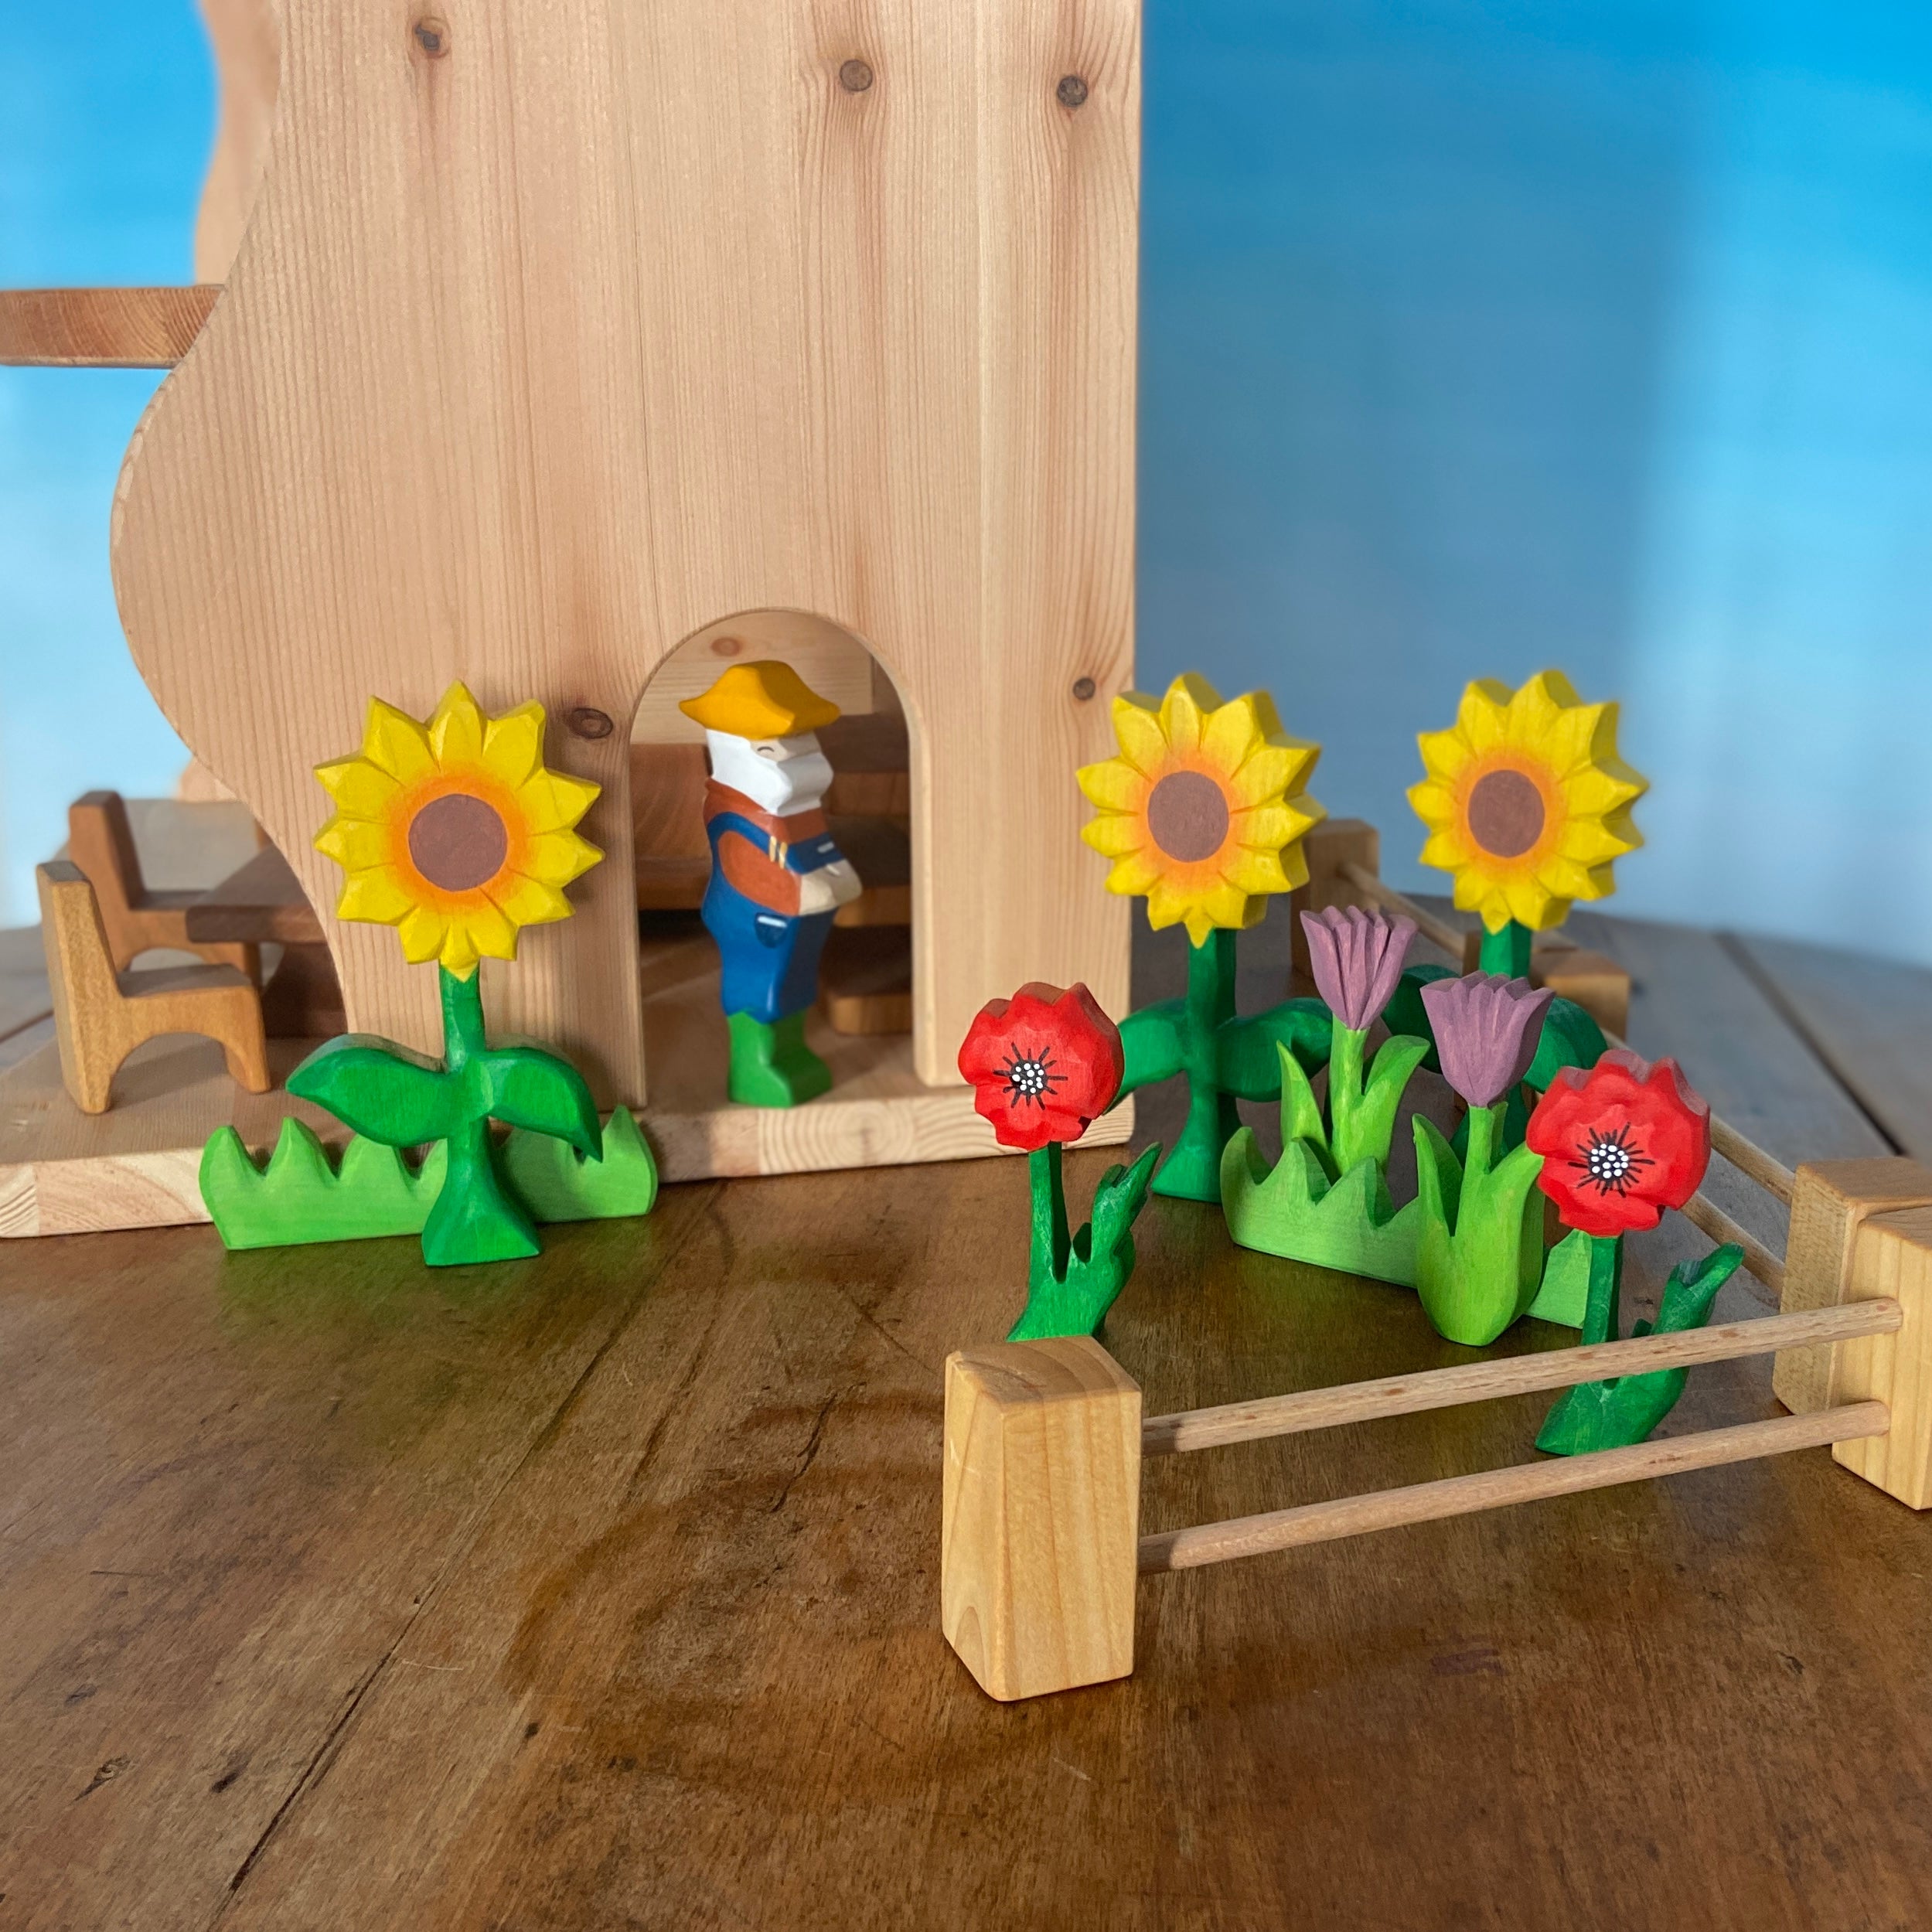 Wooden toy flowers - Waldorf toys & Open ended toys – Vulp's Wooden Toys